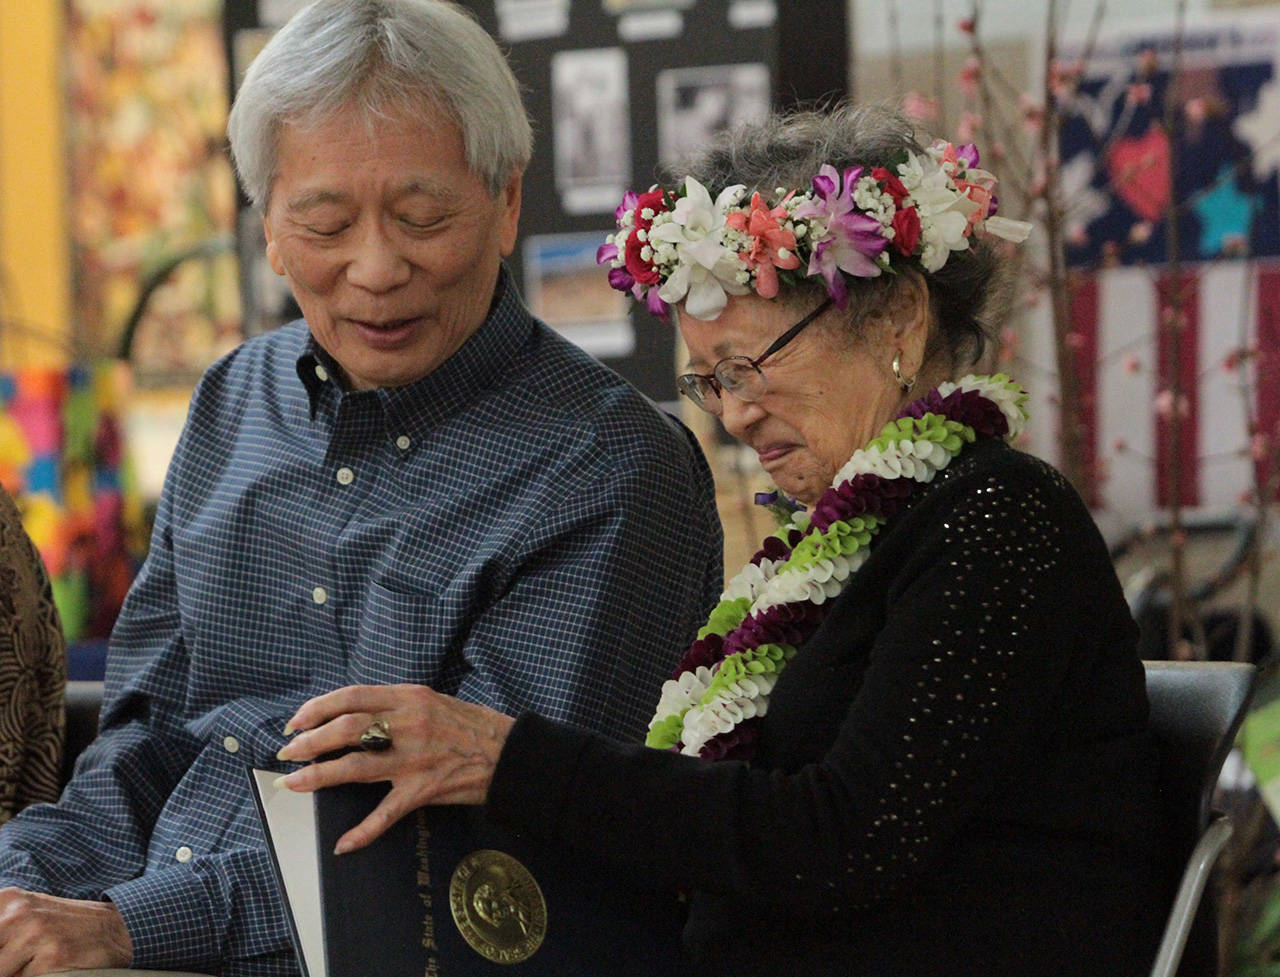 Kay Sakai Nokao admires a proclamation presented to her by Gov. Jay Inslee at her 100th birthday celebration as her son Bill Nakao looks on. (Brian Kelly | Bainbridge Island Review)